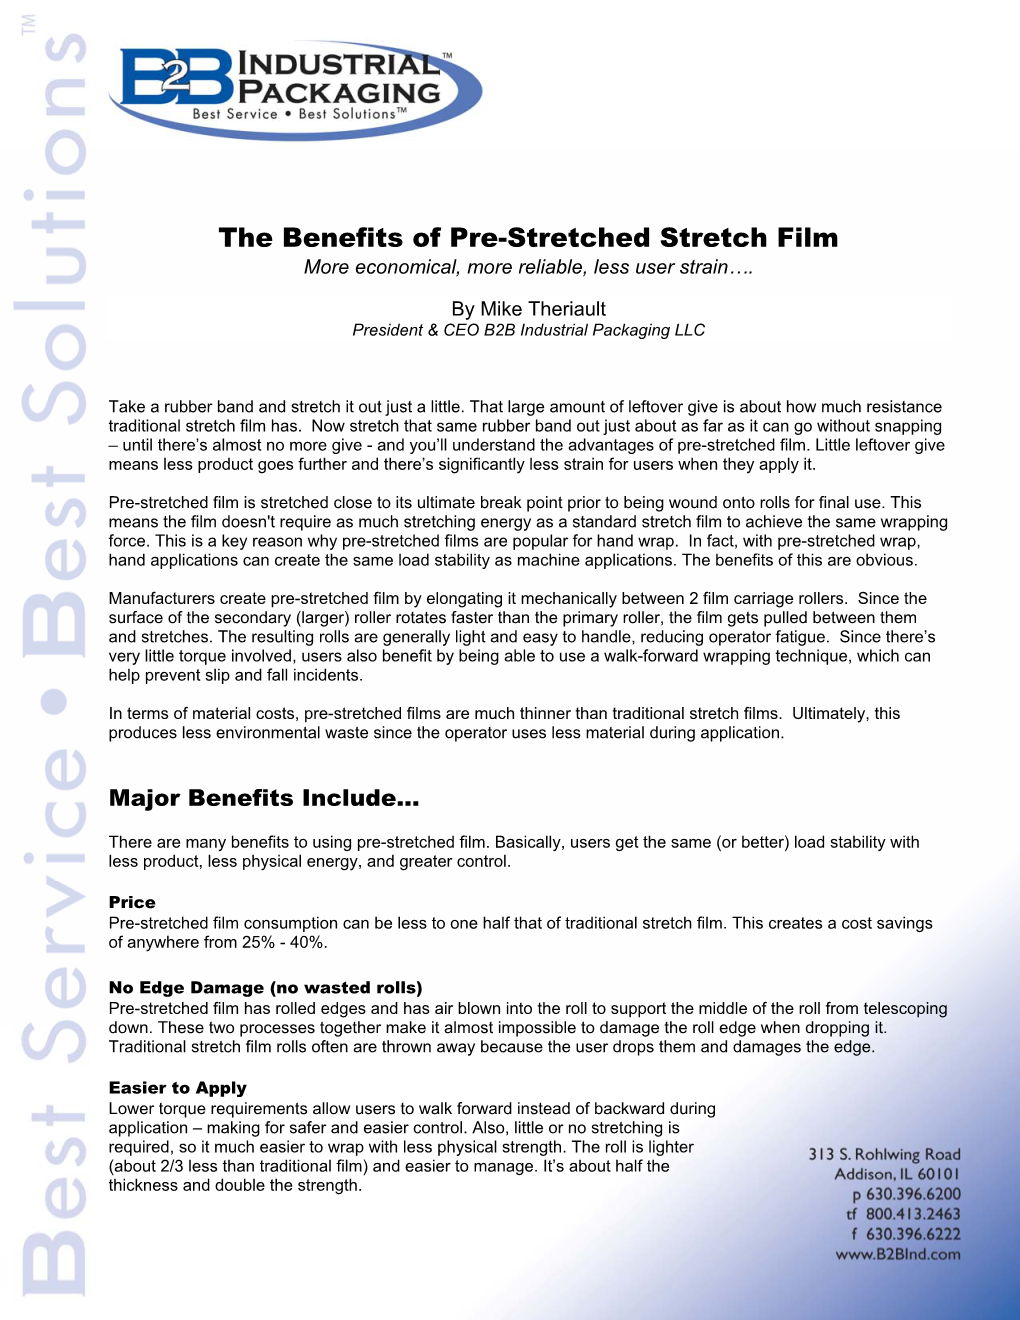 The Benefits of Pre-Stretched Stretch Film More Economical, More Reliable, Less User Strain…